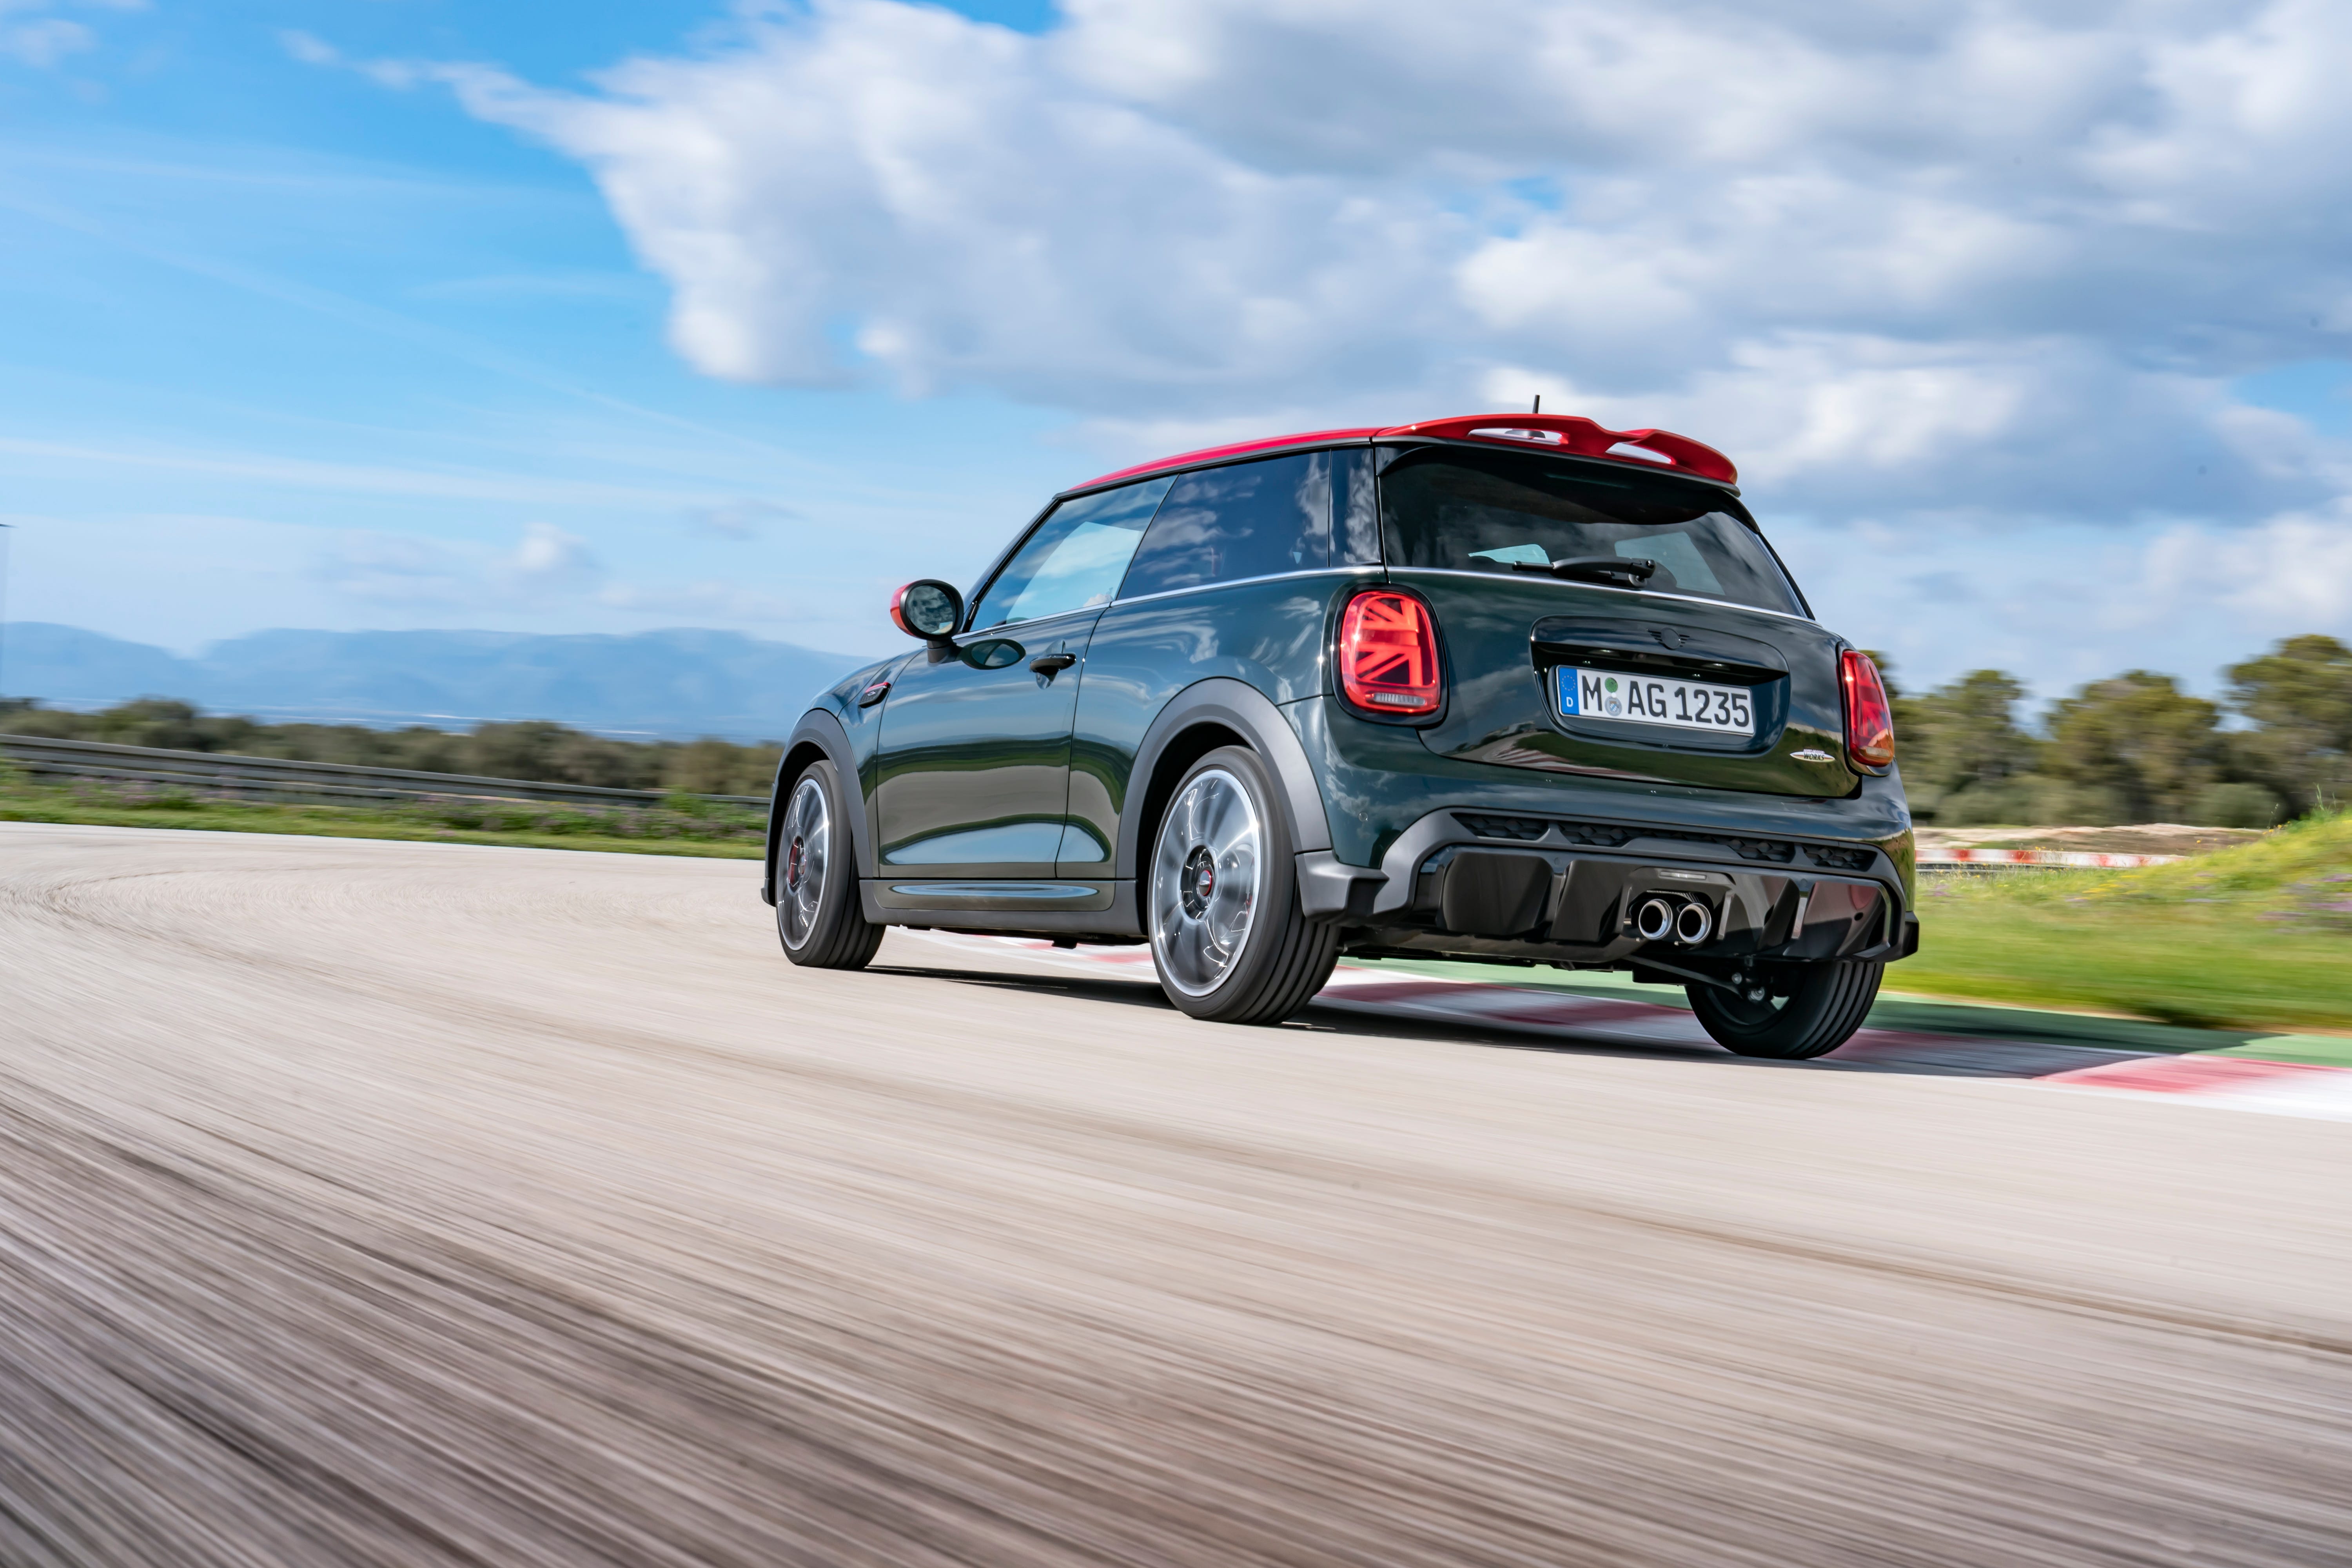 2022 Mini John Cooper Works Review: A grin-inducing go kart on